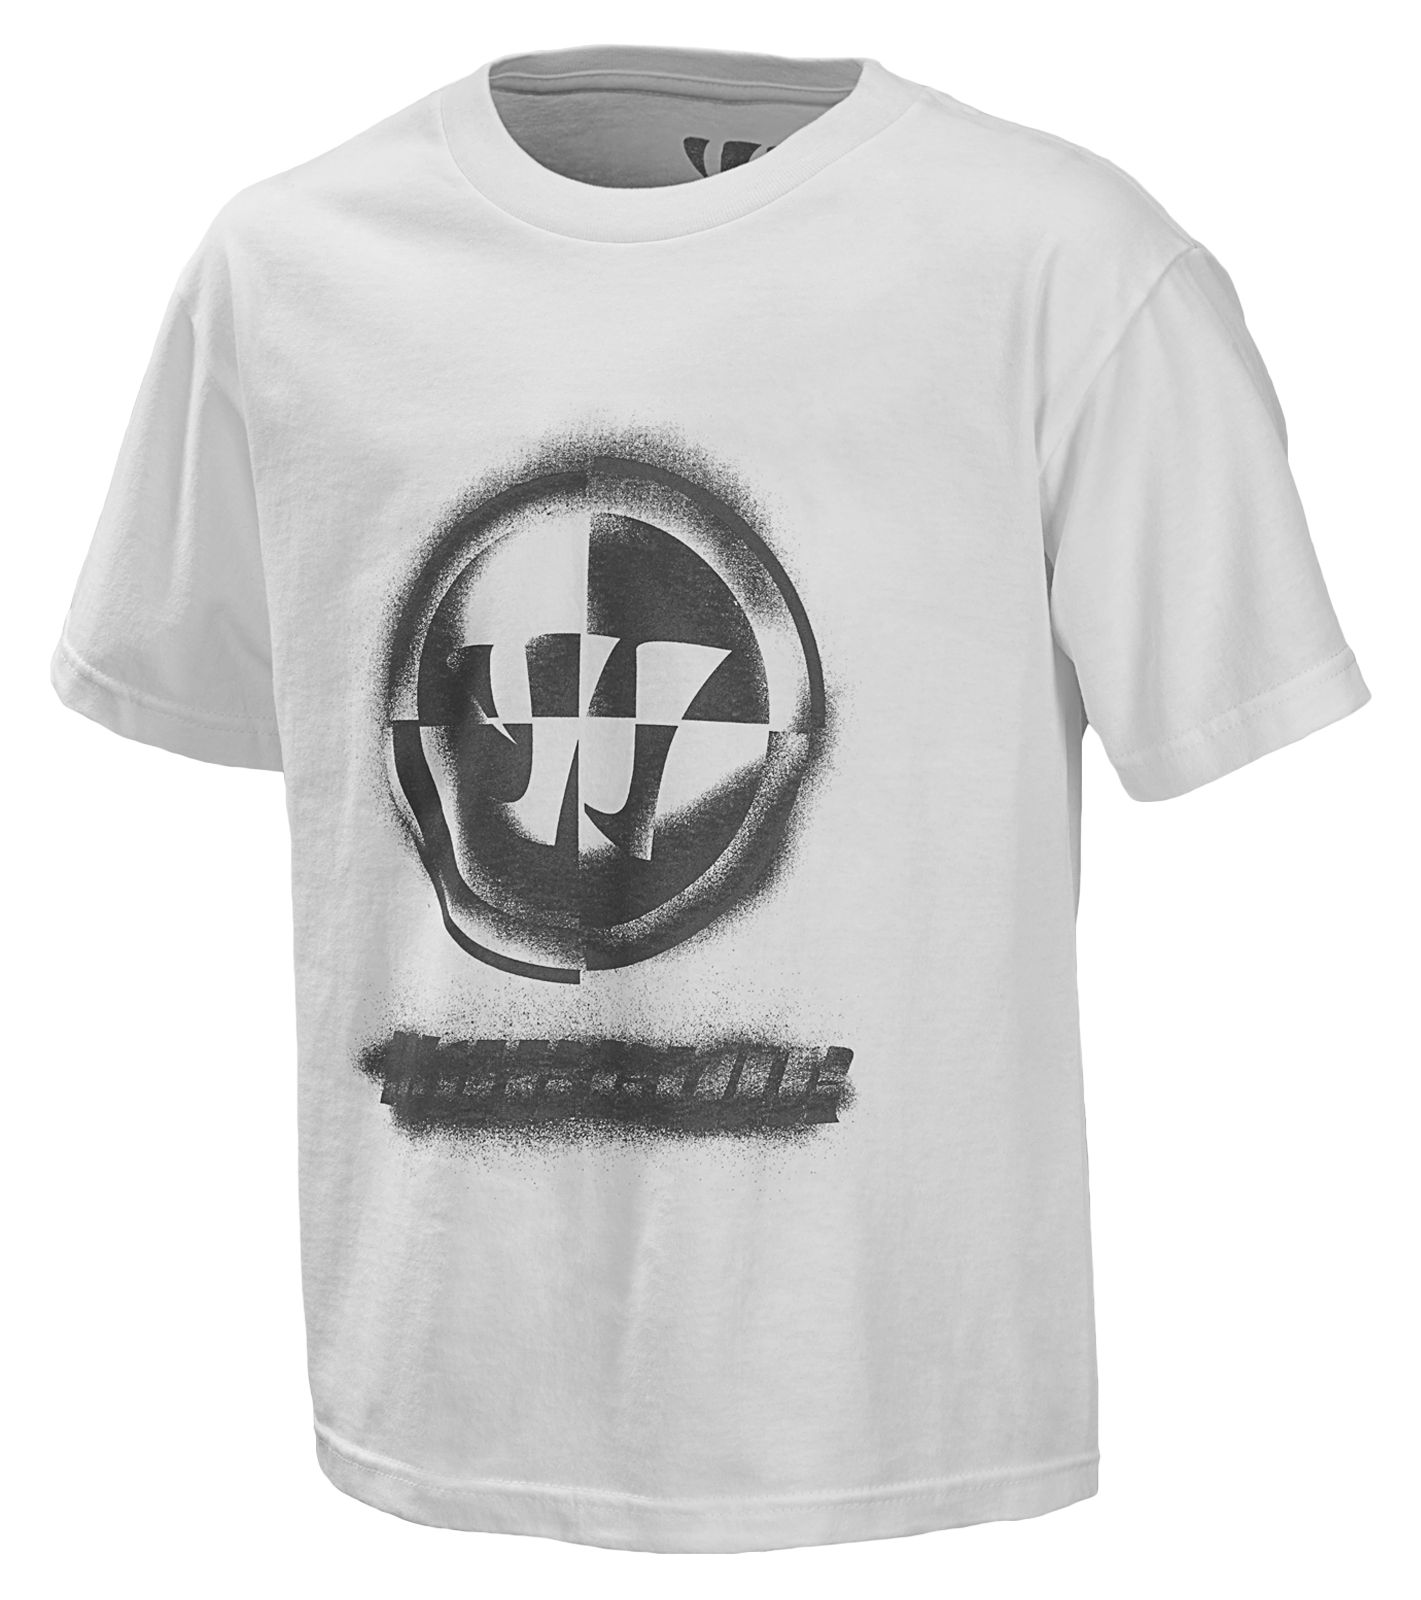 Youth Stencil Tee, White image number 1